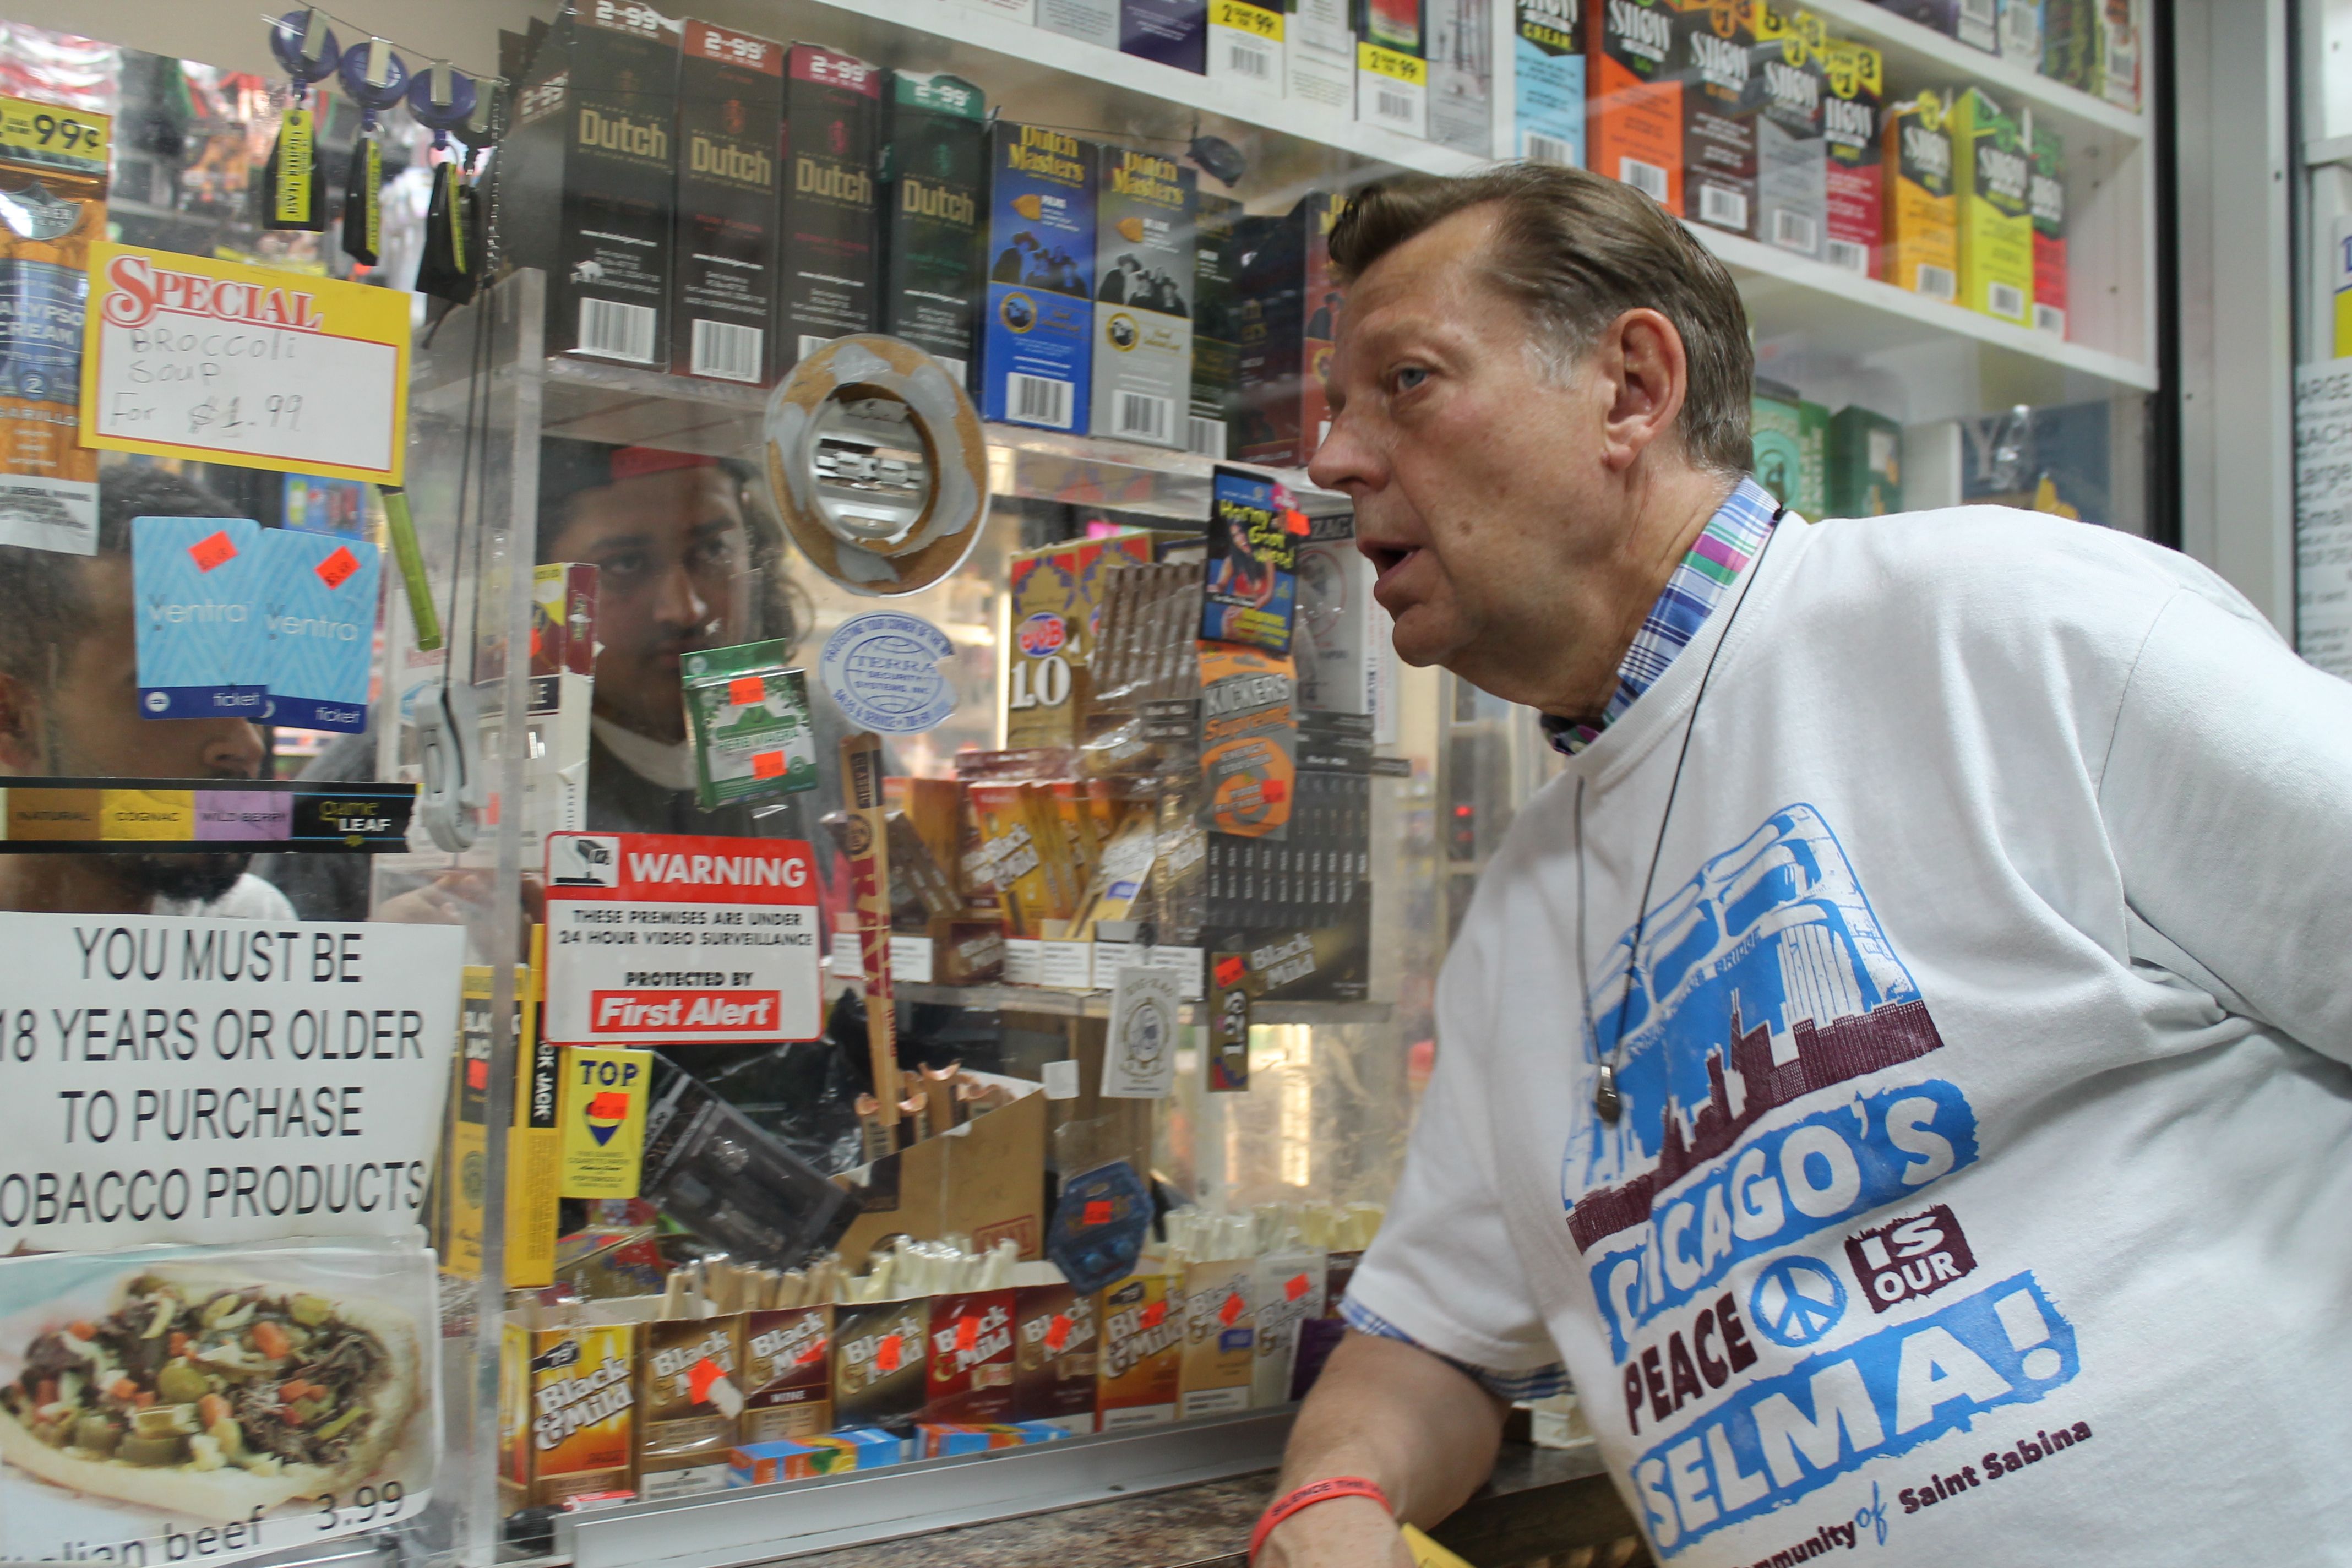 Father Pfleger talks to shop owners,  "hire Black . . . "